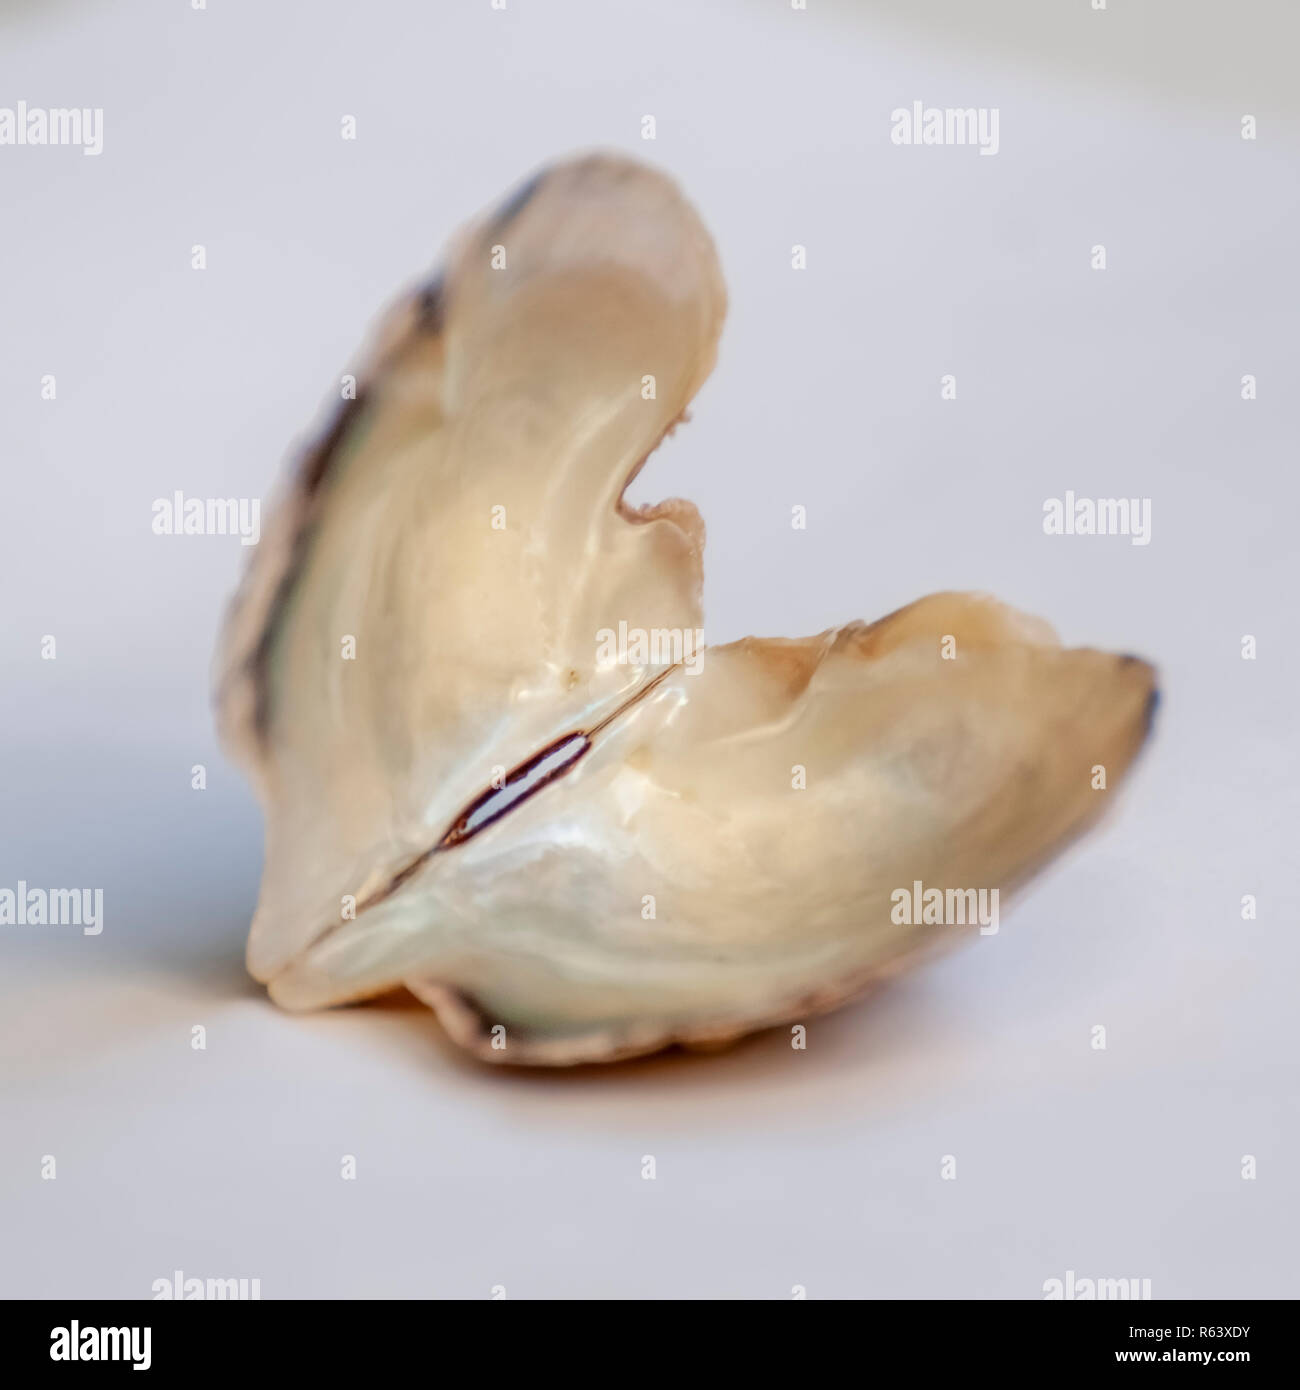 Open double clam shell still held together on white background Stock Photo